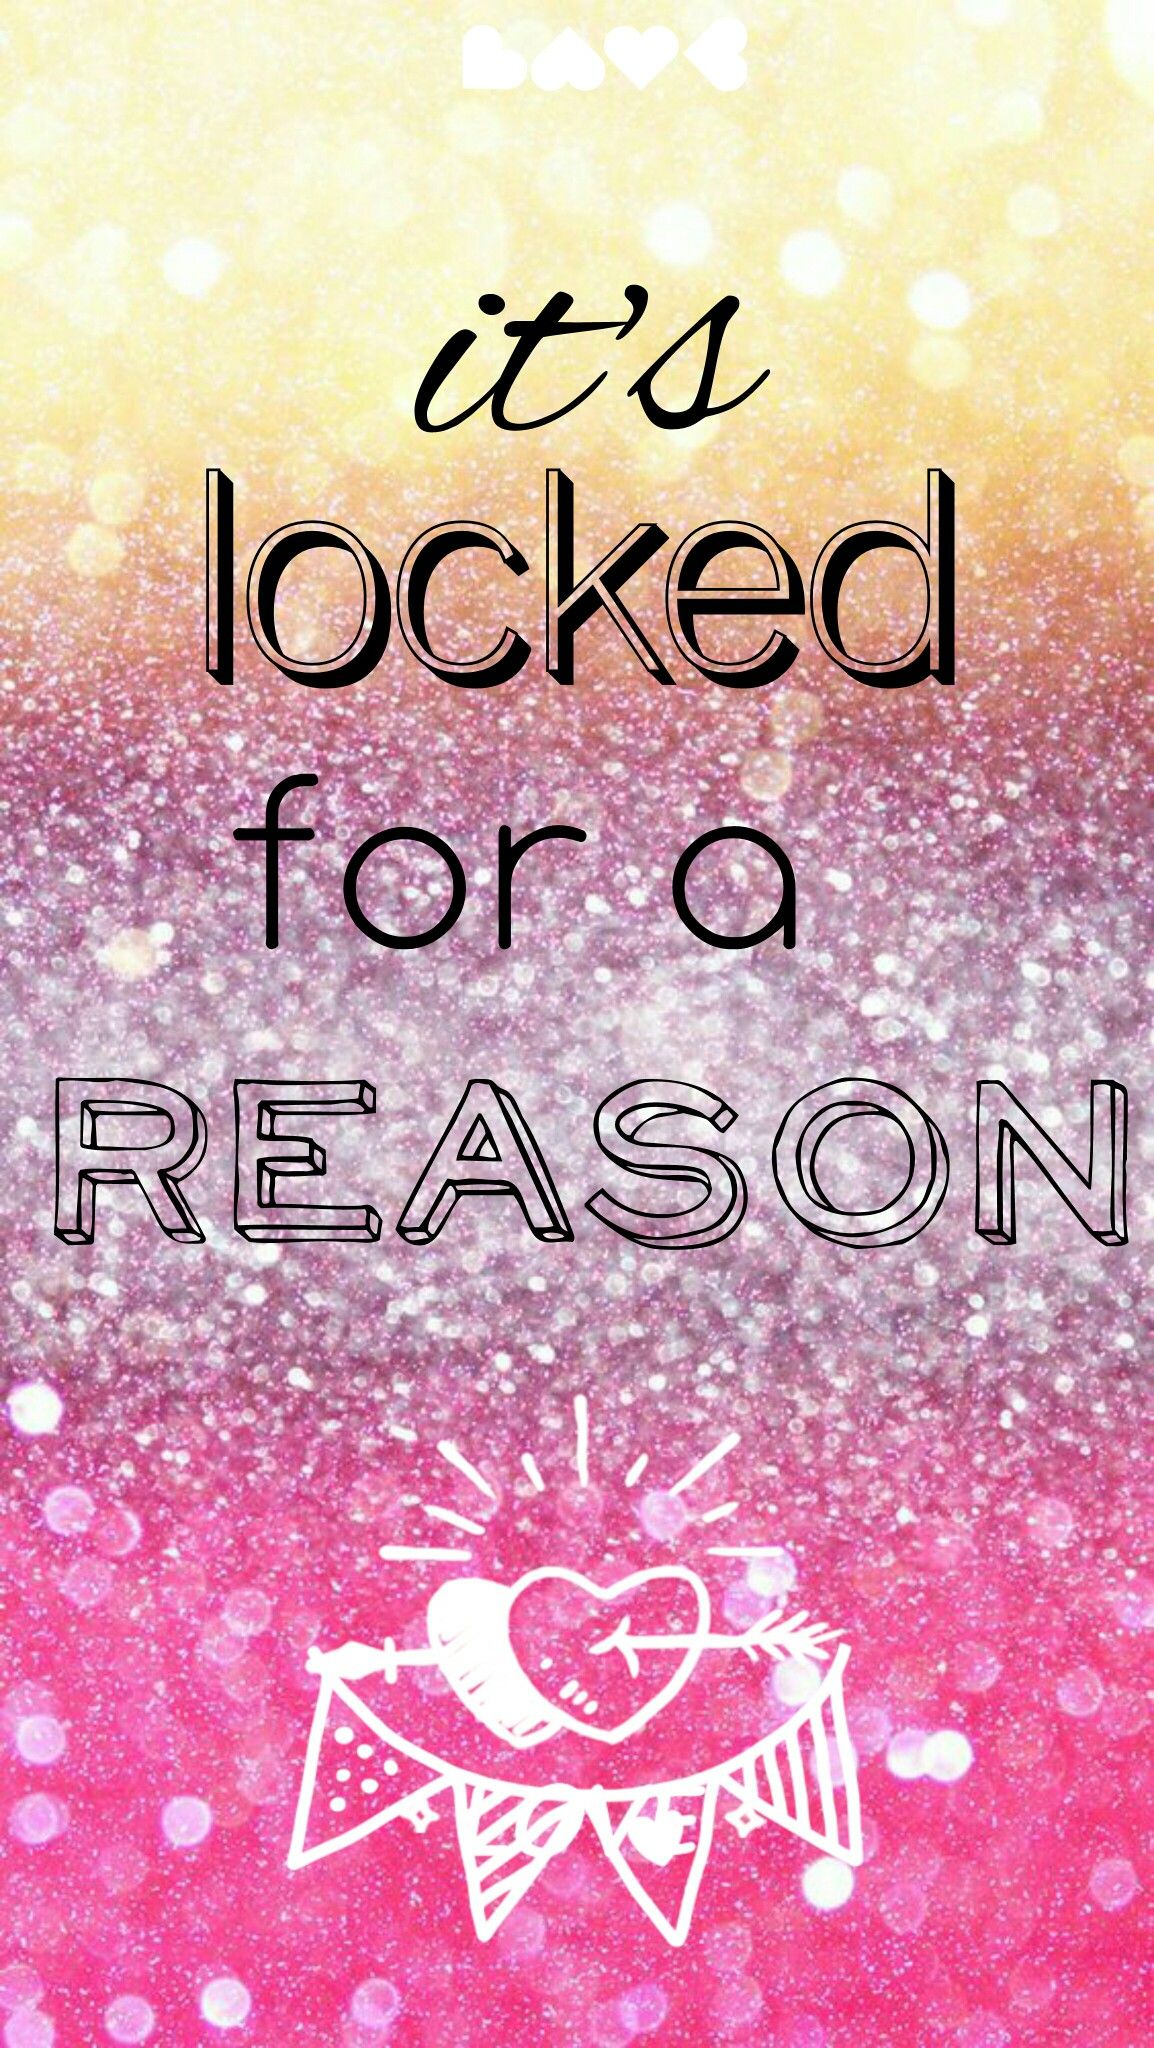 Locked For A Reason Background - HD Wallpaper 